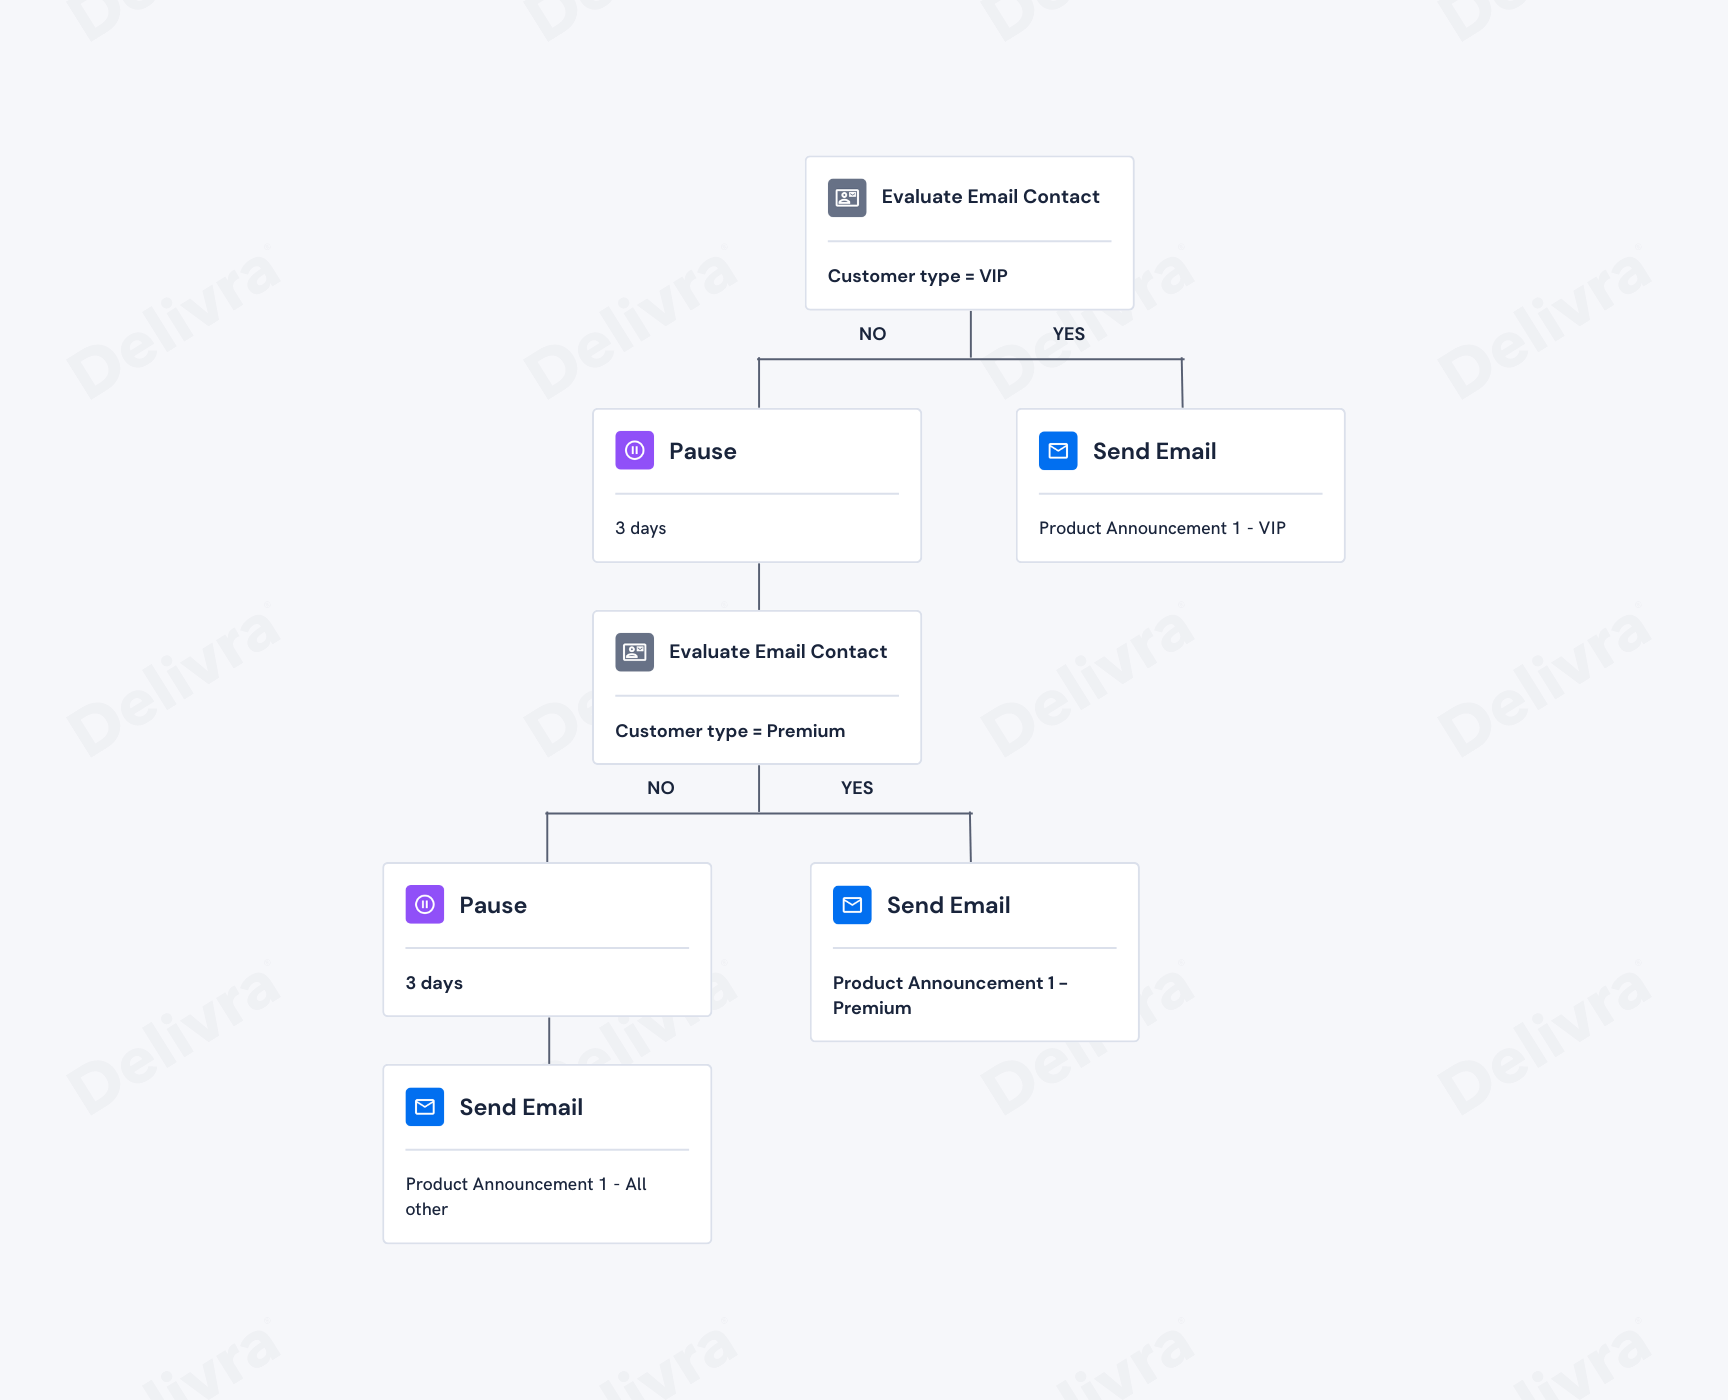 Workflow - Staggered by Field Eval (VIP) (1728 × 1400 px).png